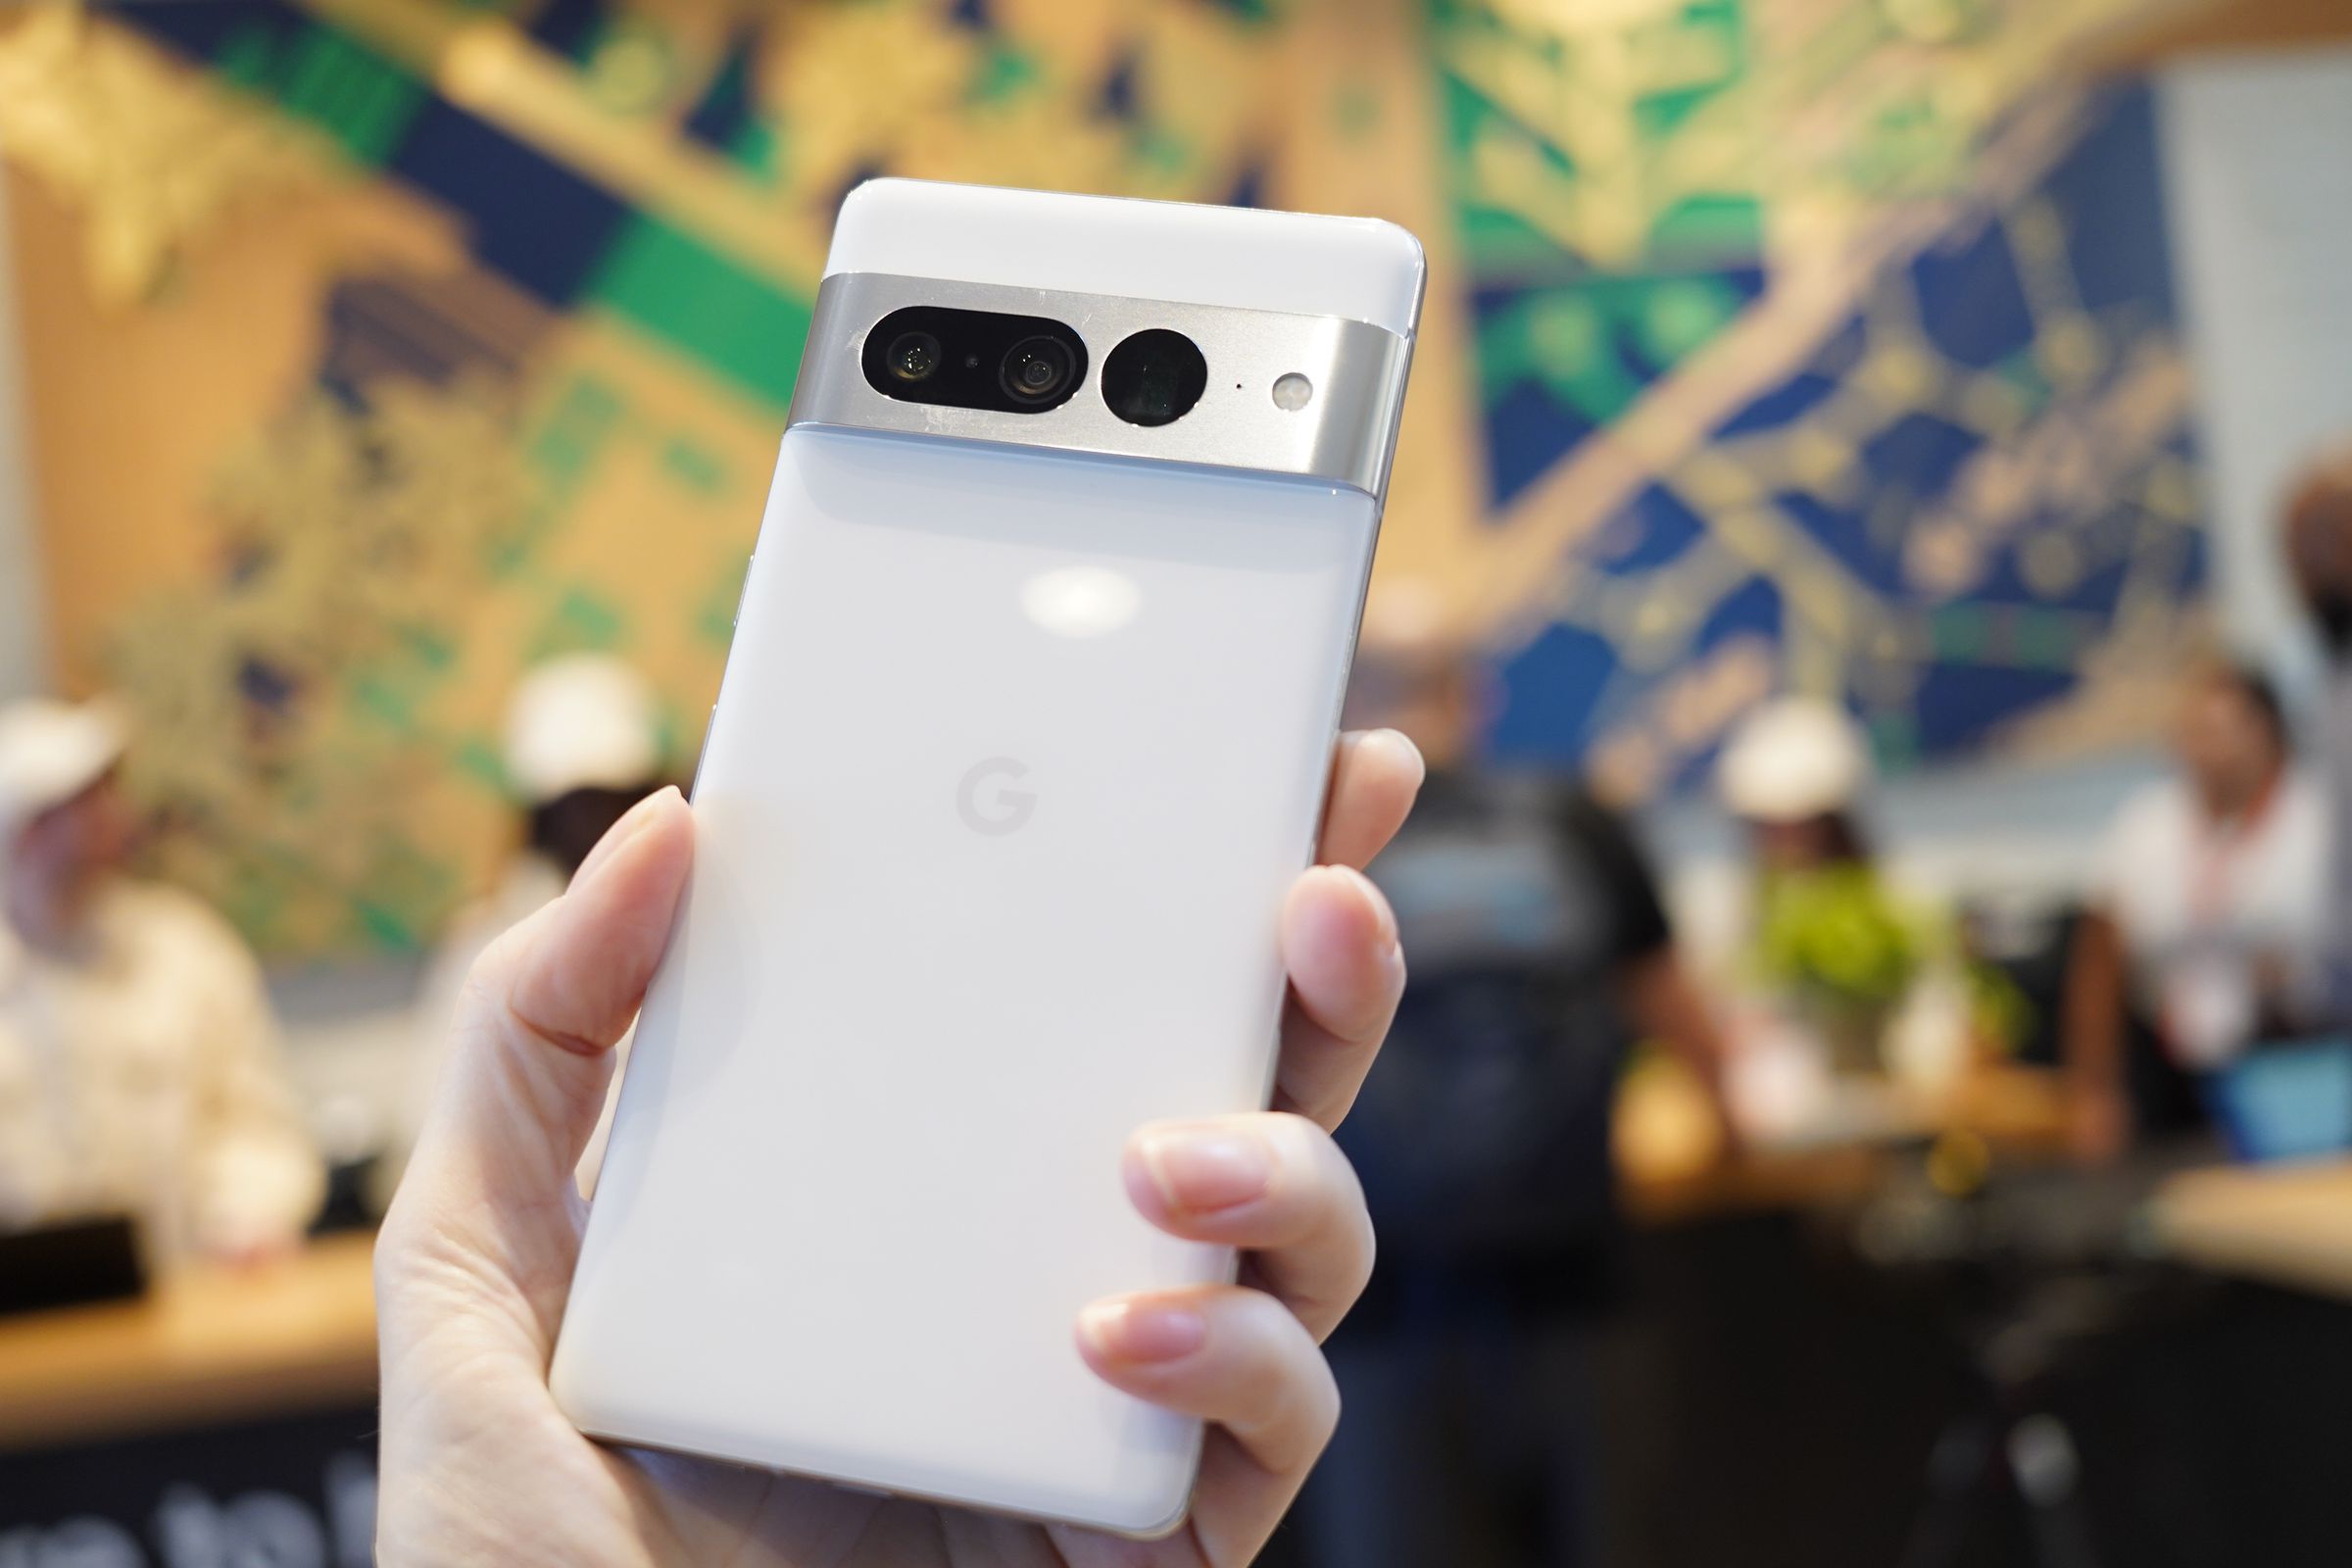 The Google Pixel 7 Pro phone with its back turned, revealing its white design and three rear-facing cameras.